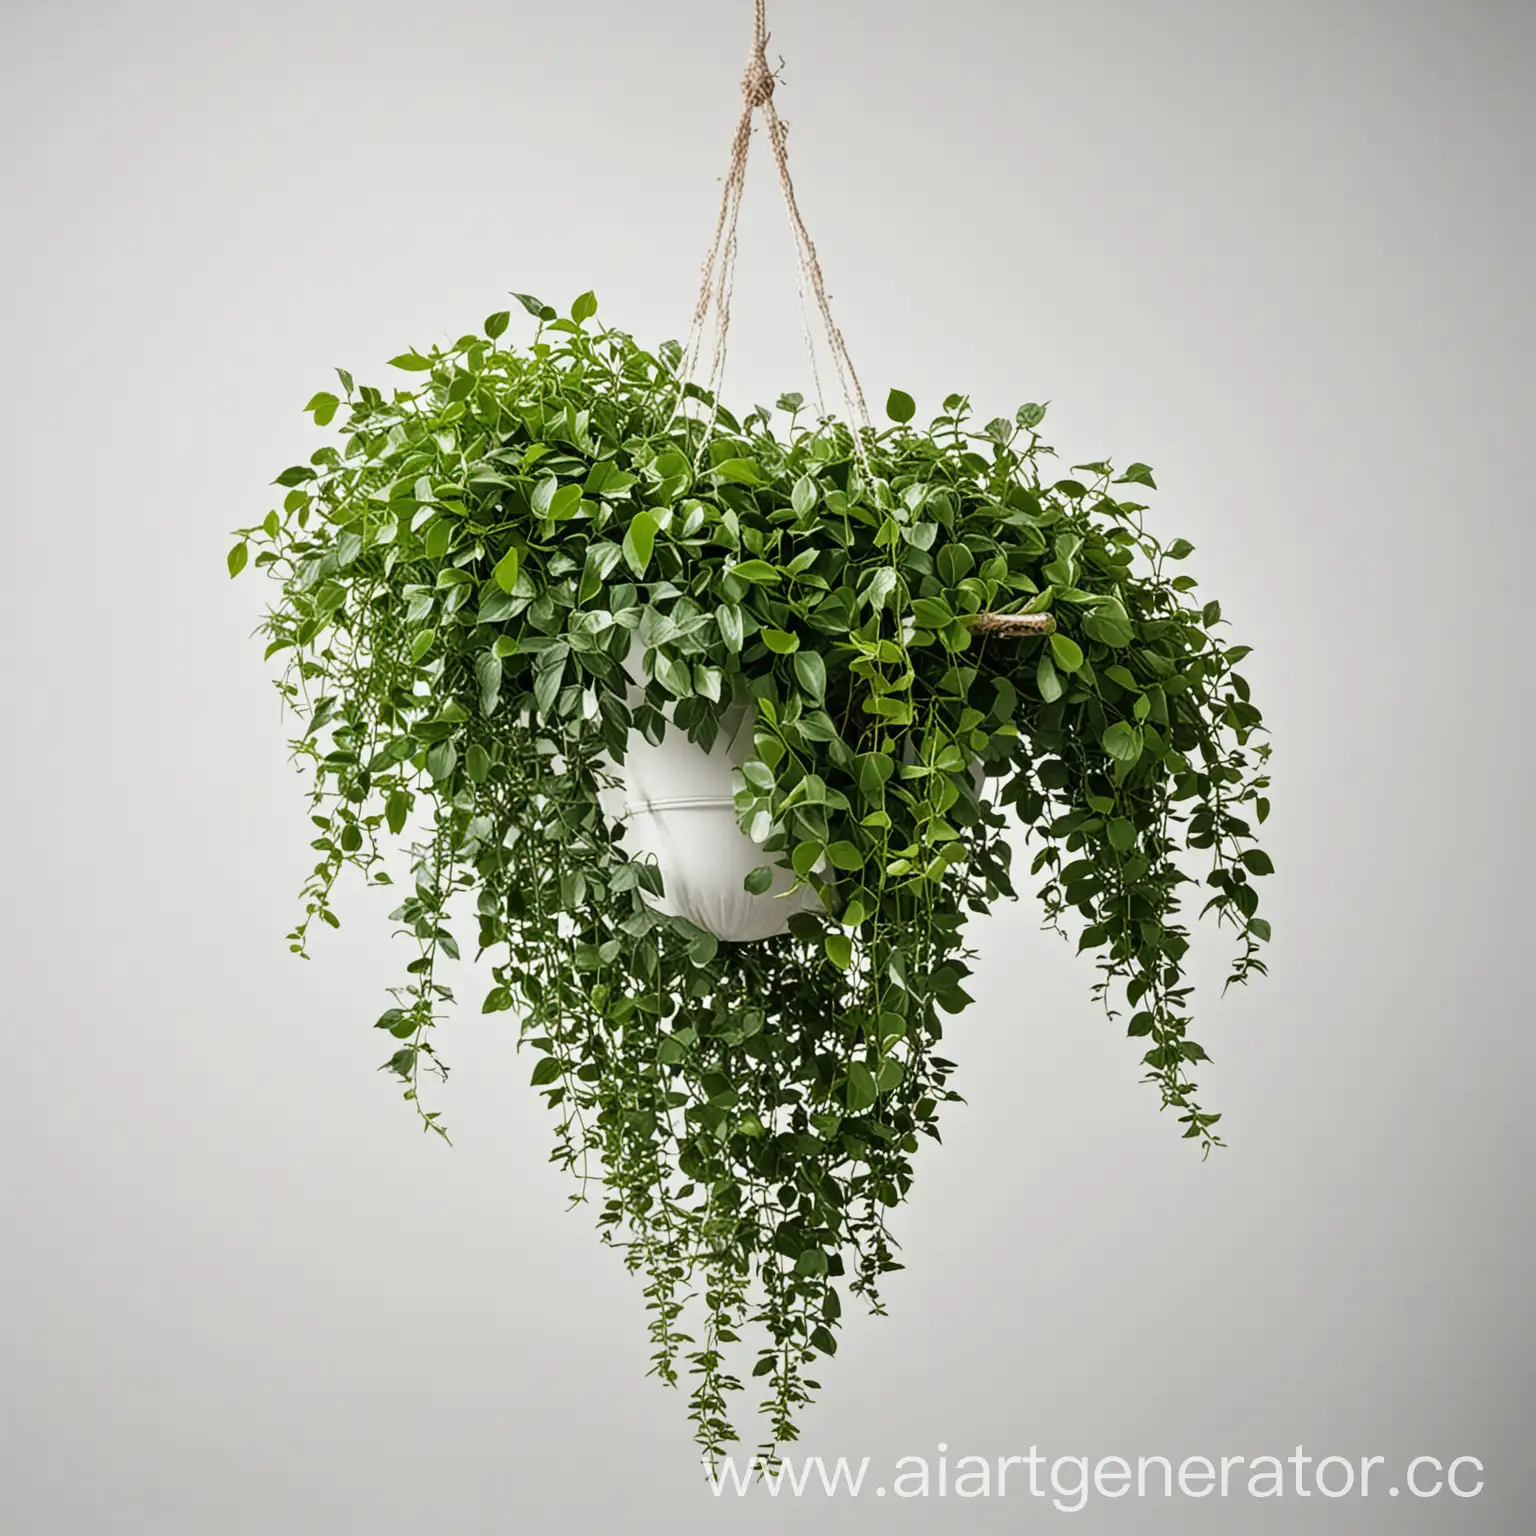 Lush-Green-Hanging-Plants-on-White-Background